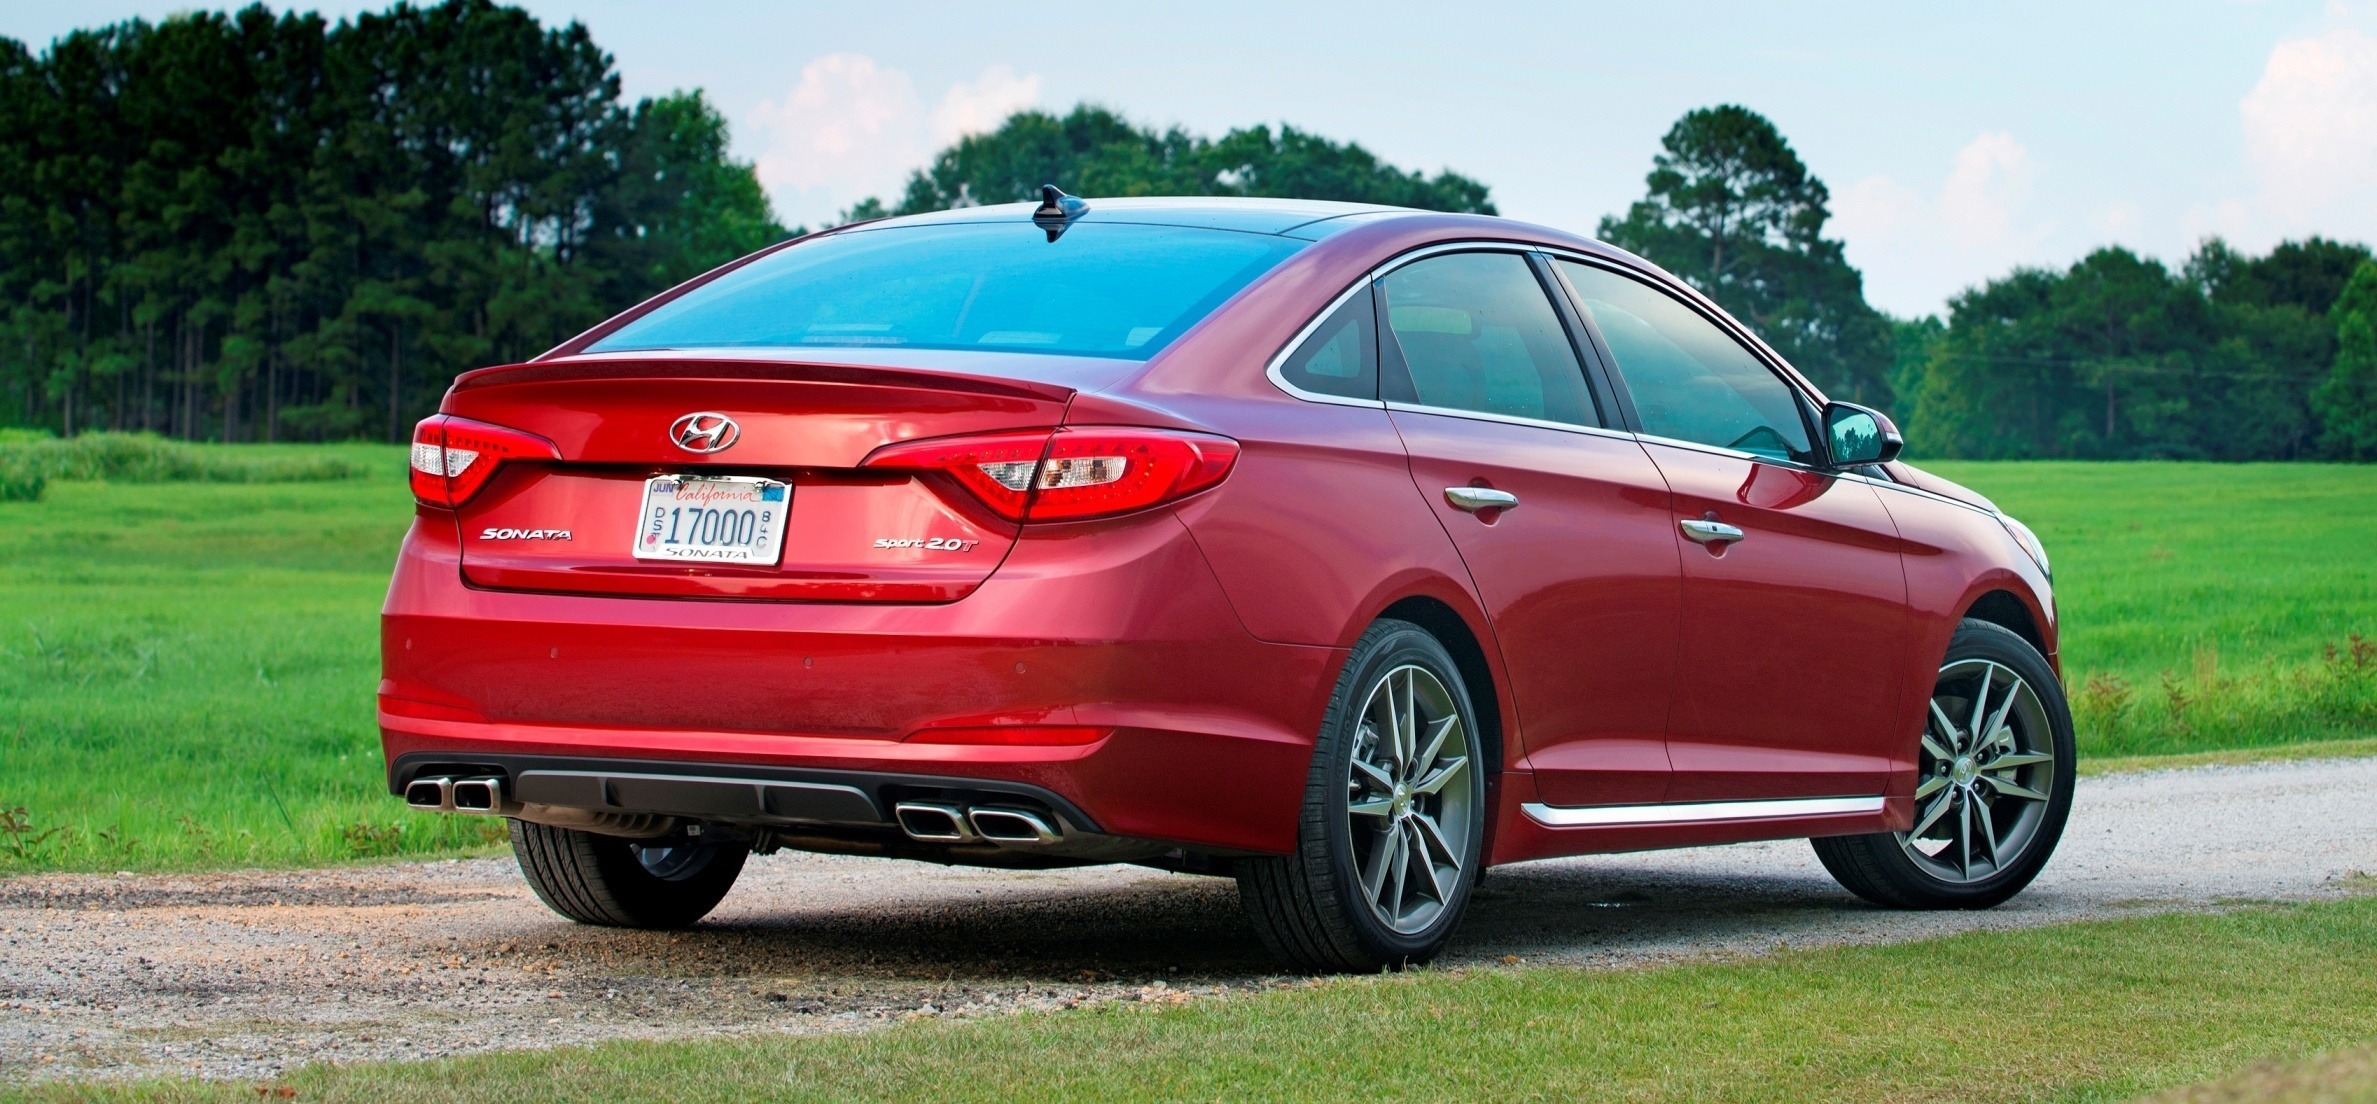 2015 Hyundai Sonata Sport - Buyers Guide to All Nine Colors + Animated